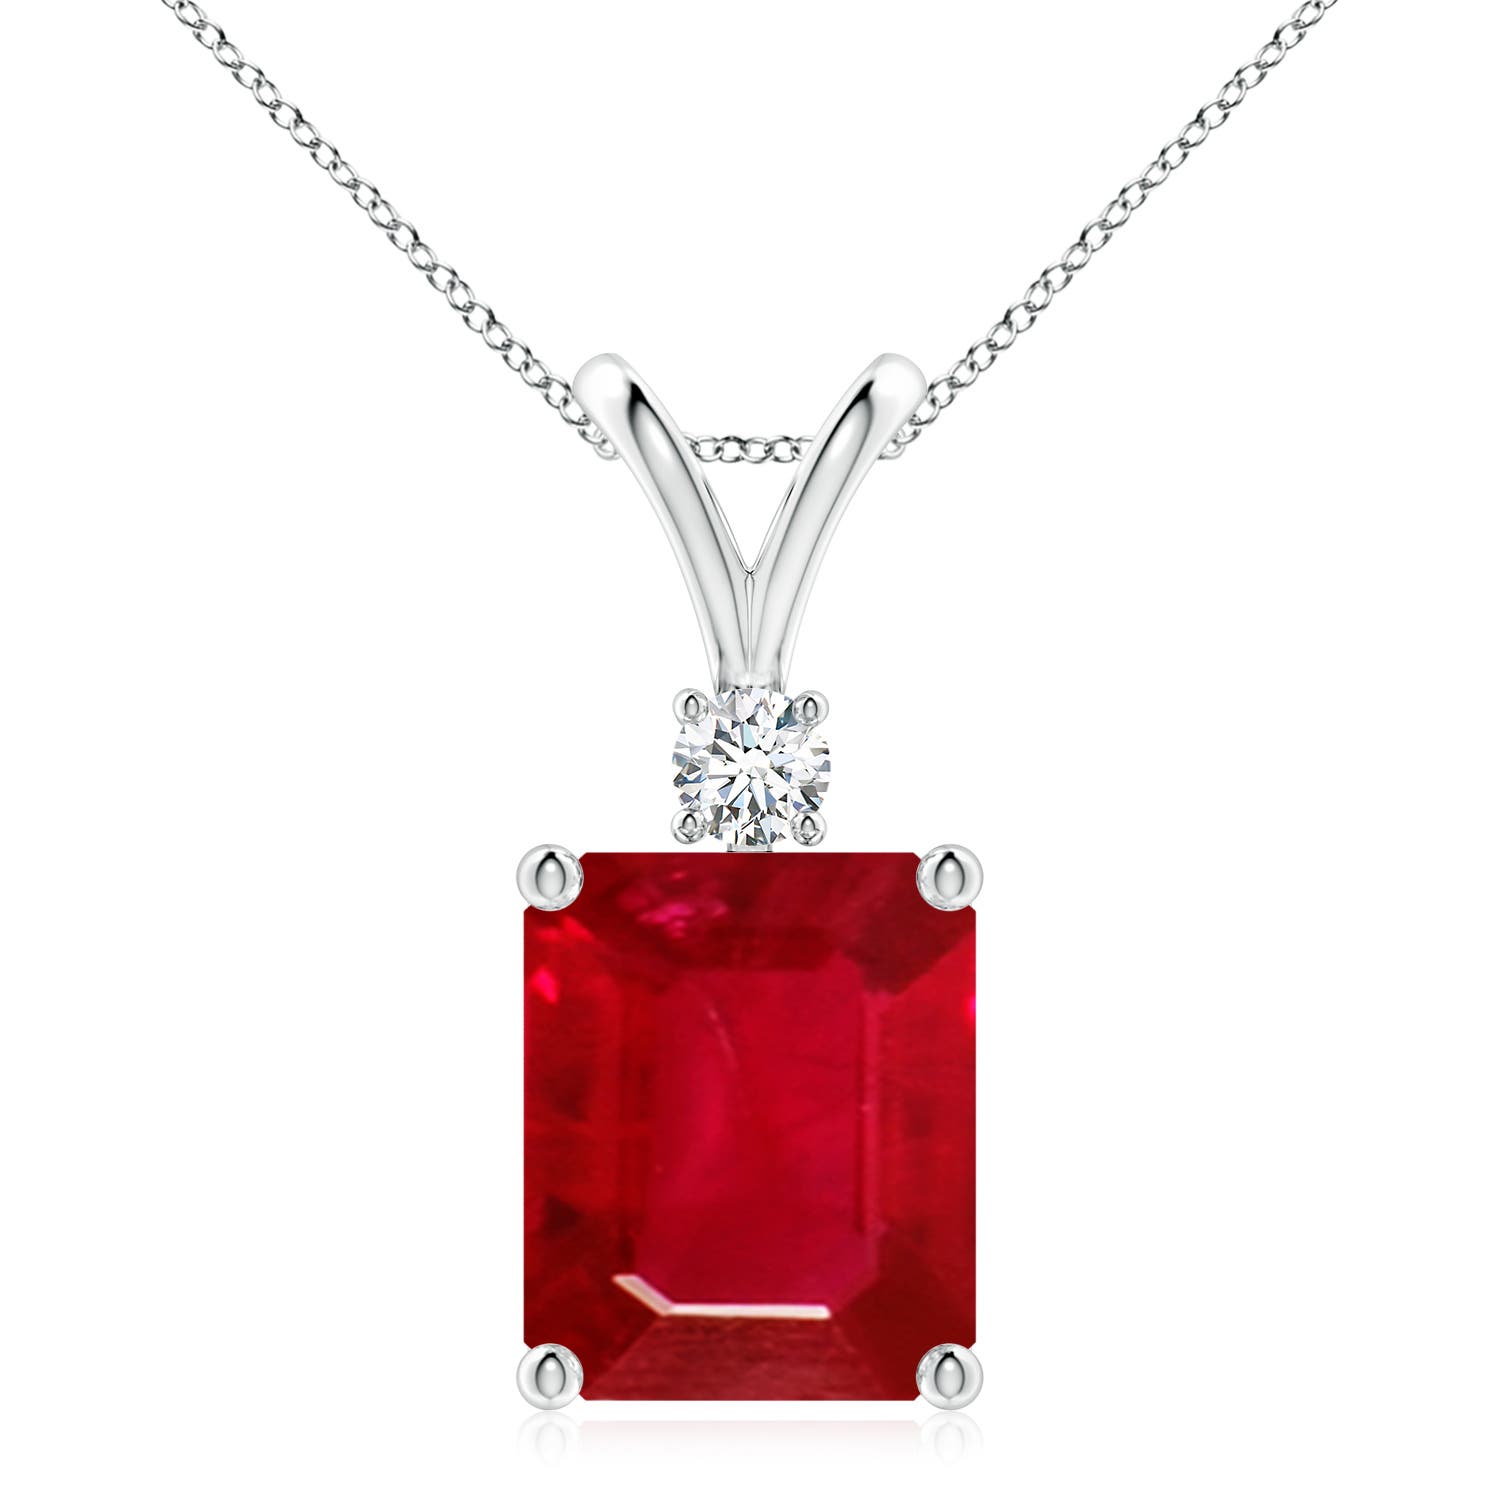 AAA - Ruby / 6.41 CT / 14 KT White Gold